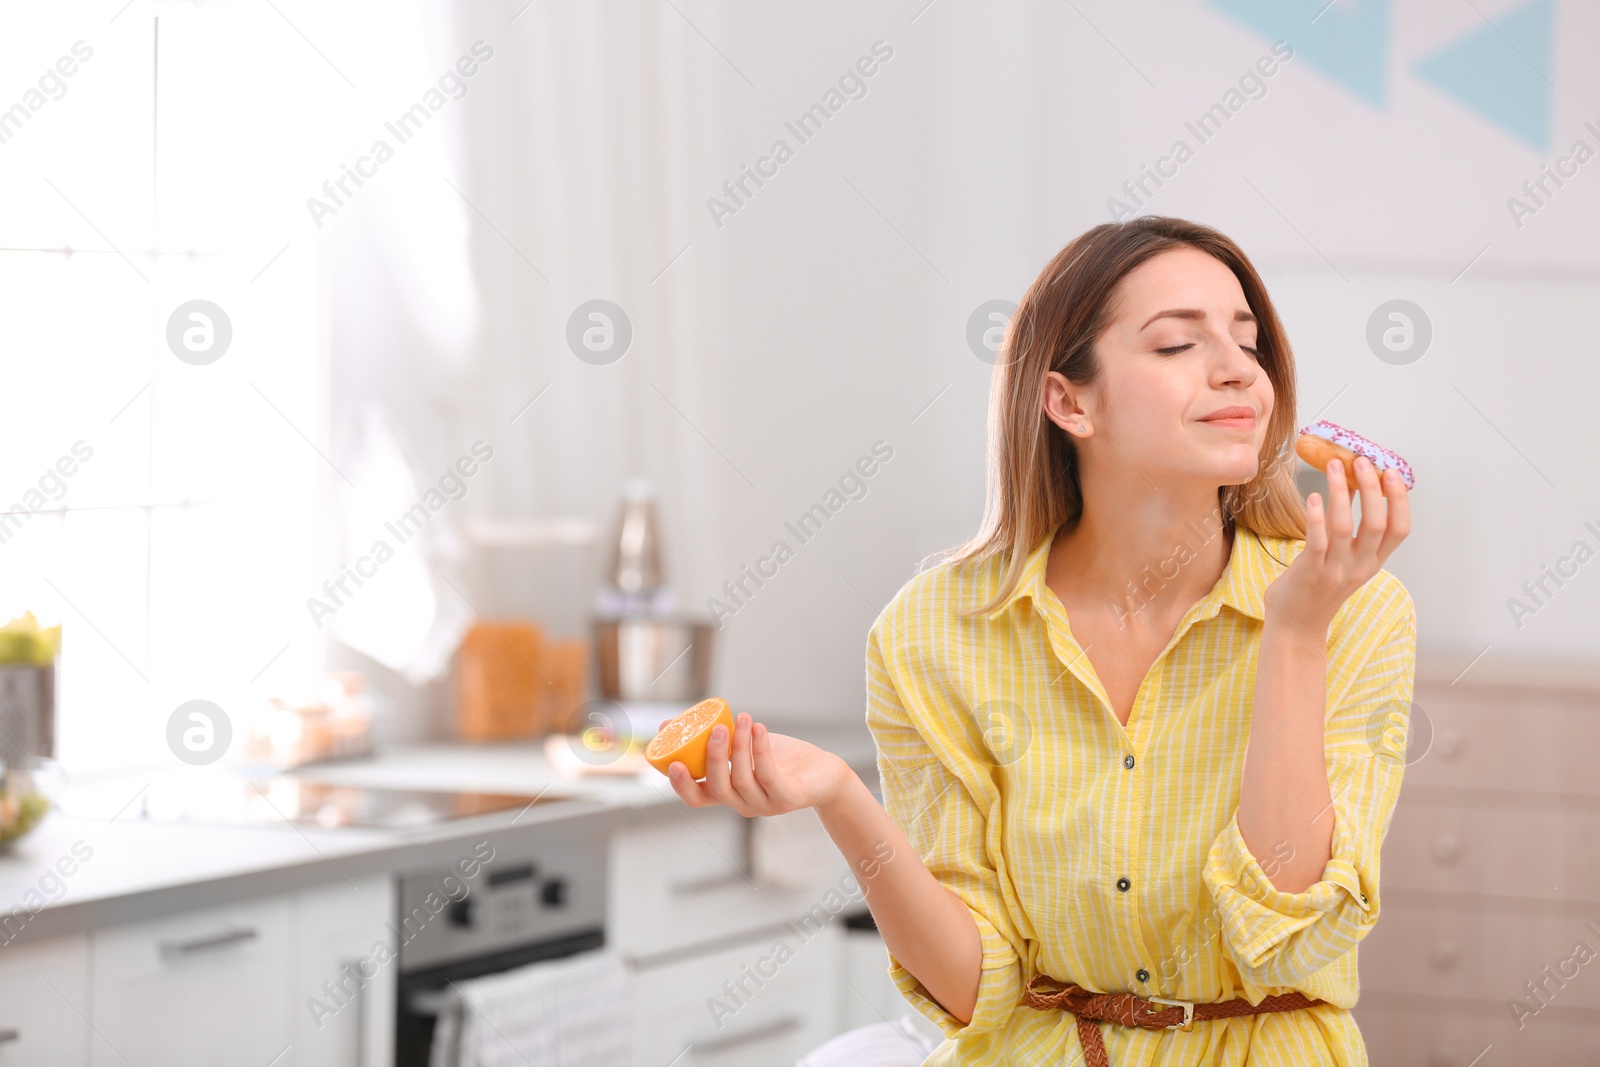 Photo of Young woman choosing between orange and donut in kitchen, space for text. Healthy diet